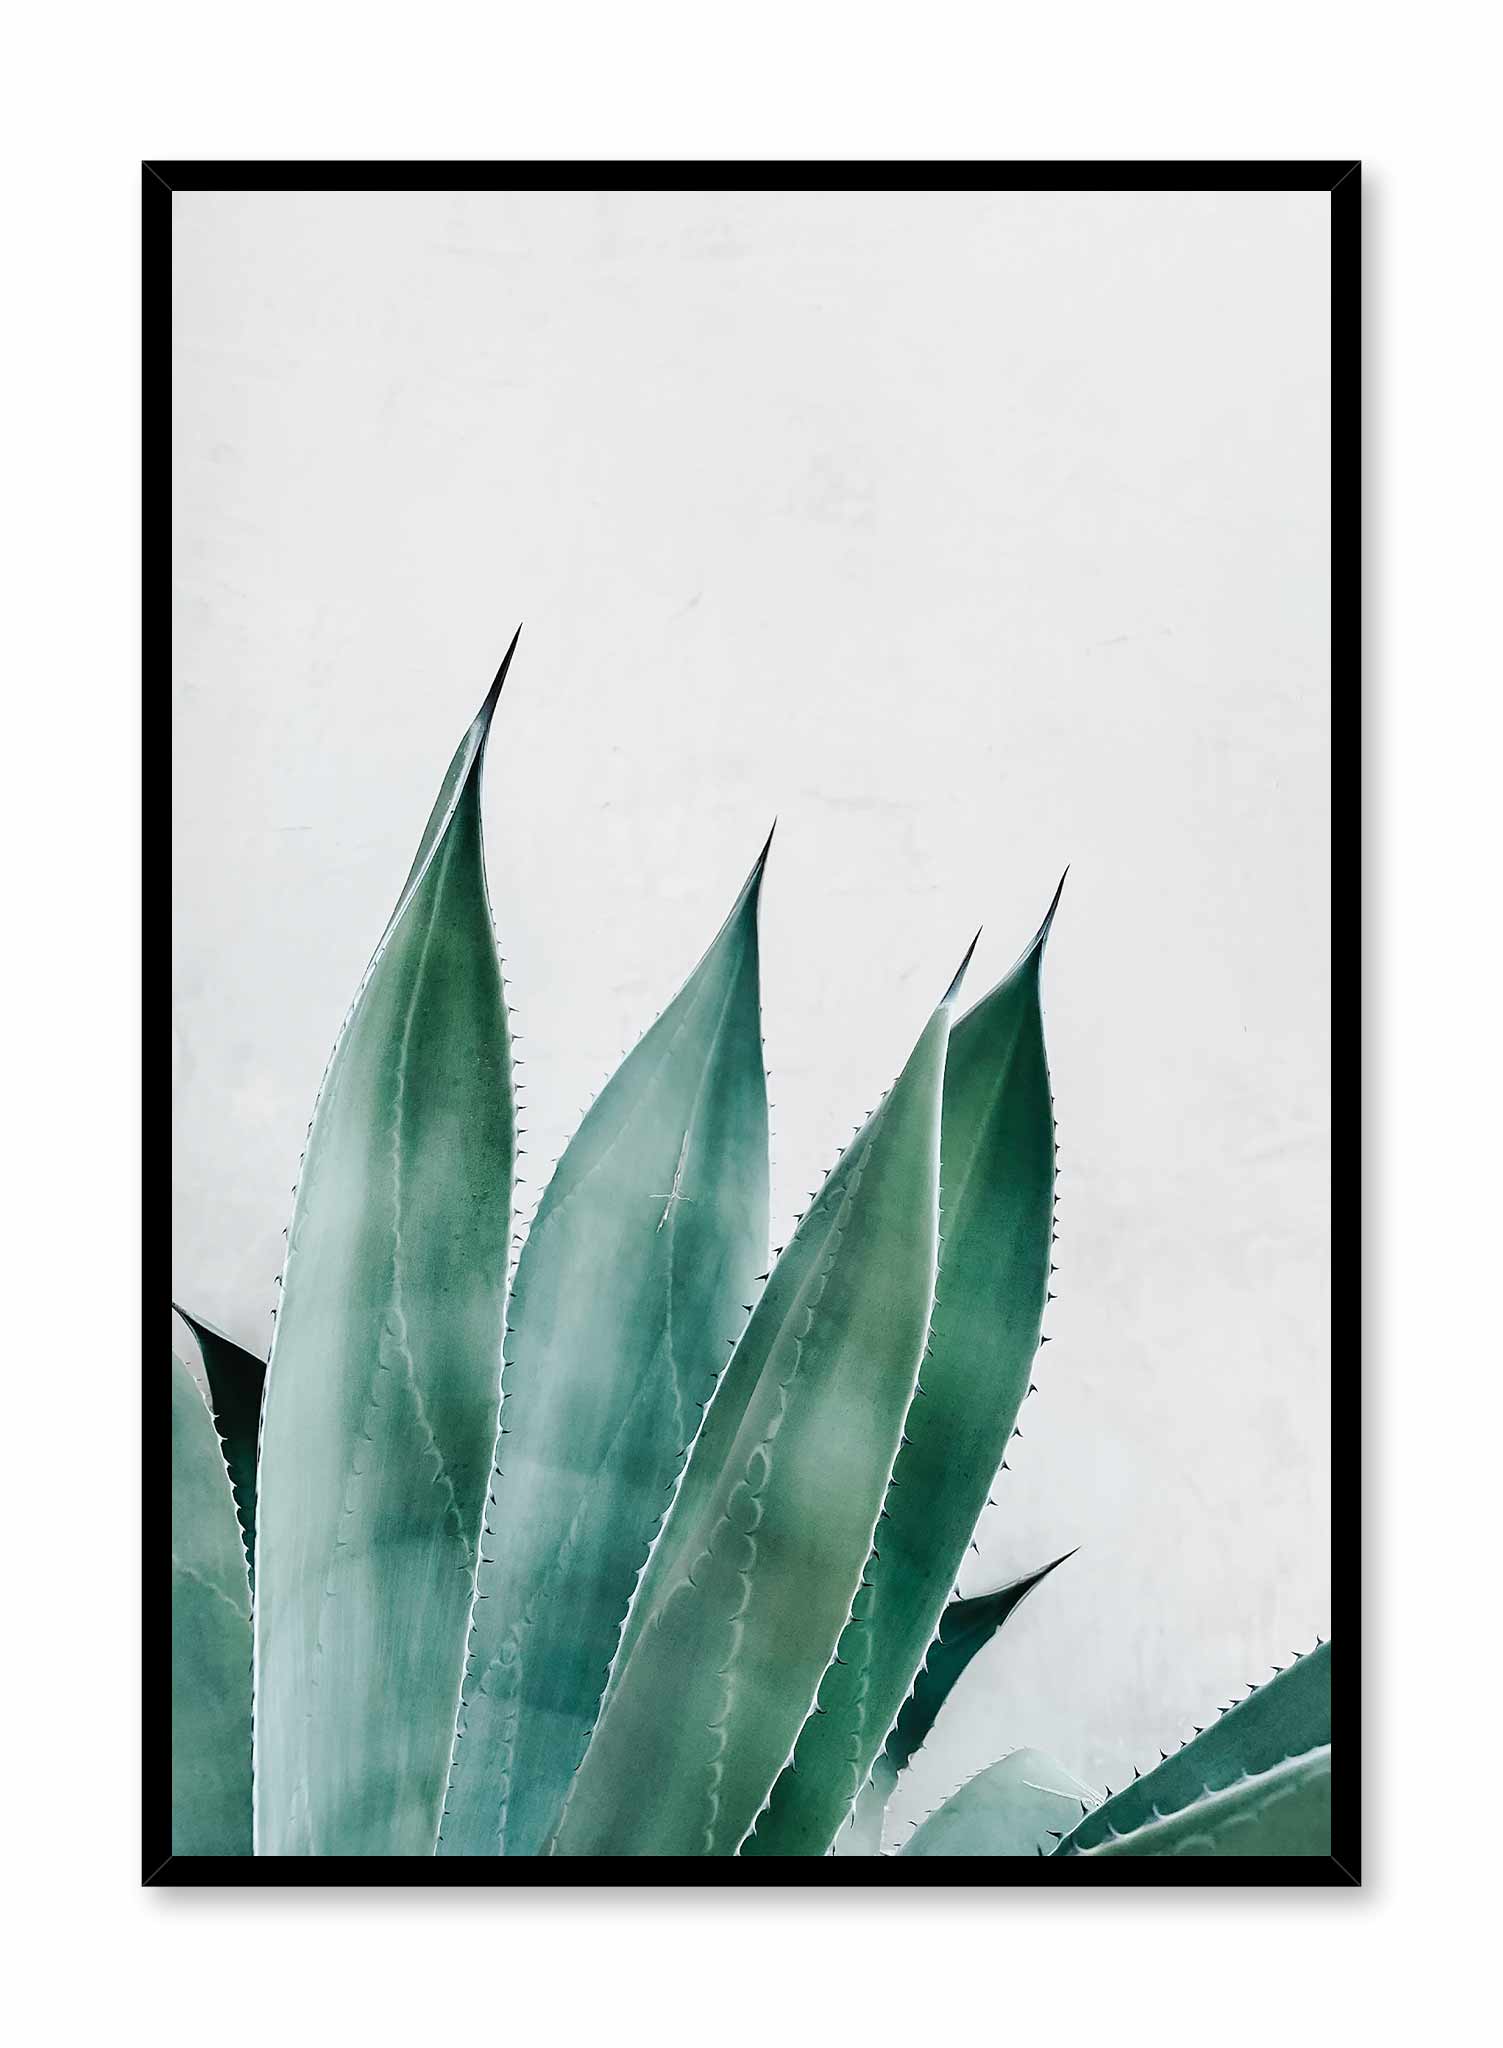 Prickly Leaves is a minimalist photography poster of a prickly green succulent by Opposite Wall.